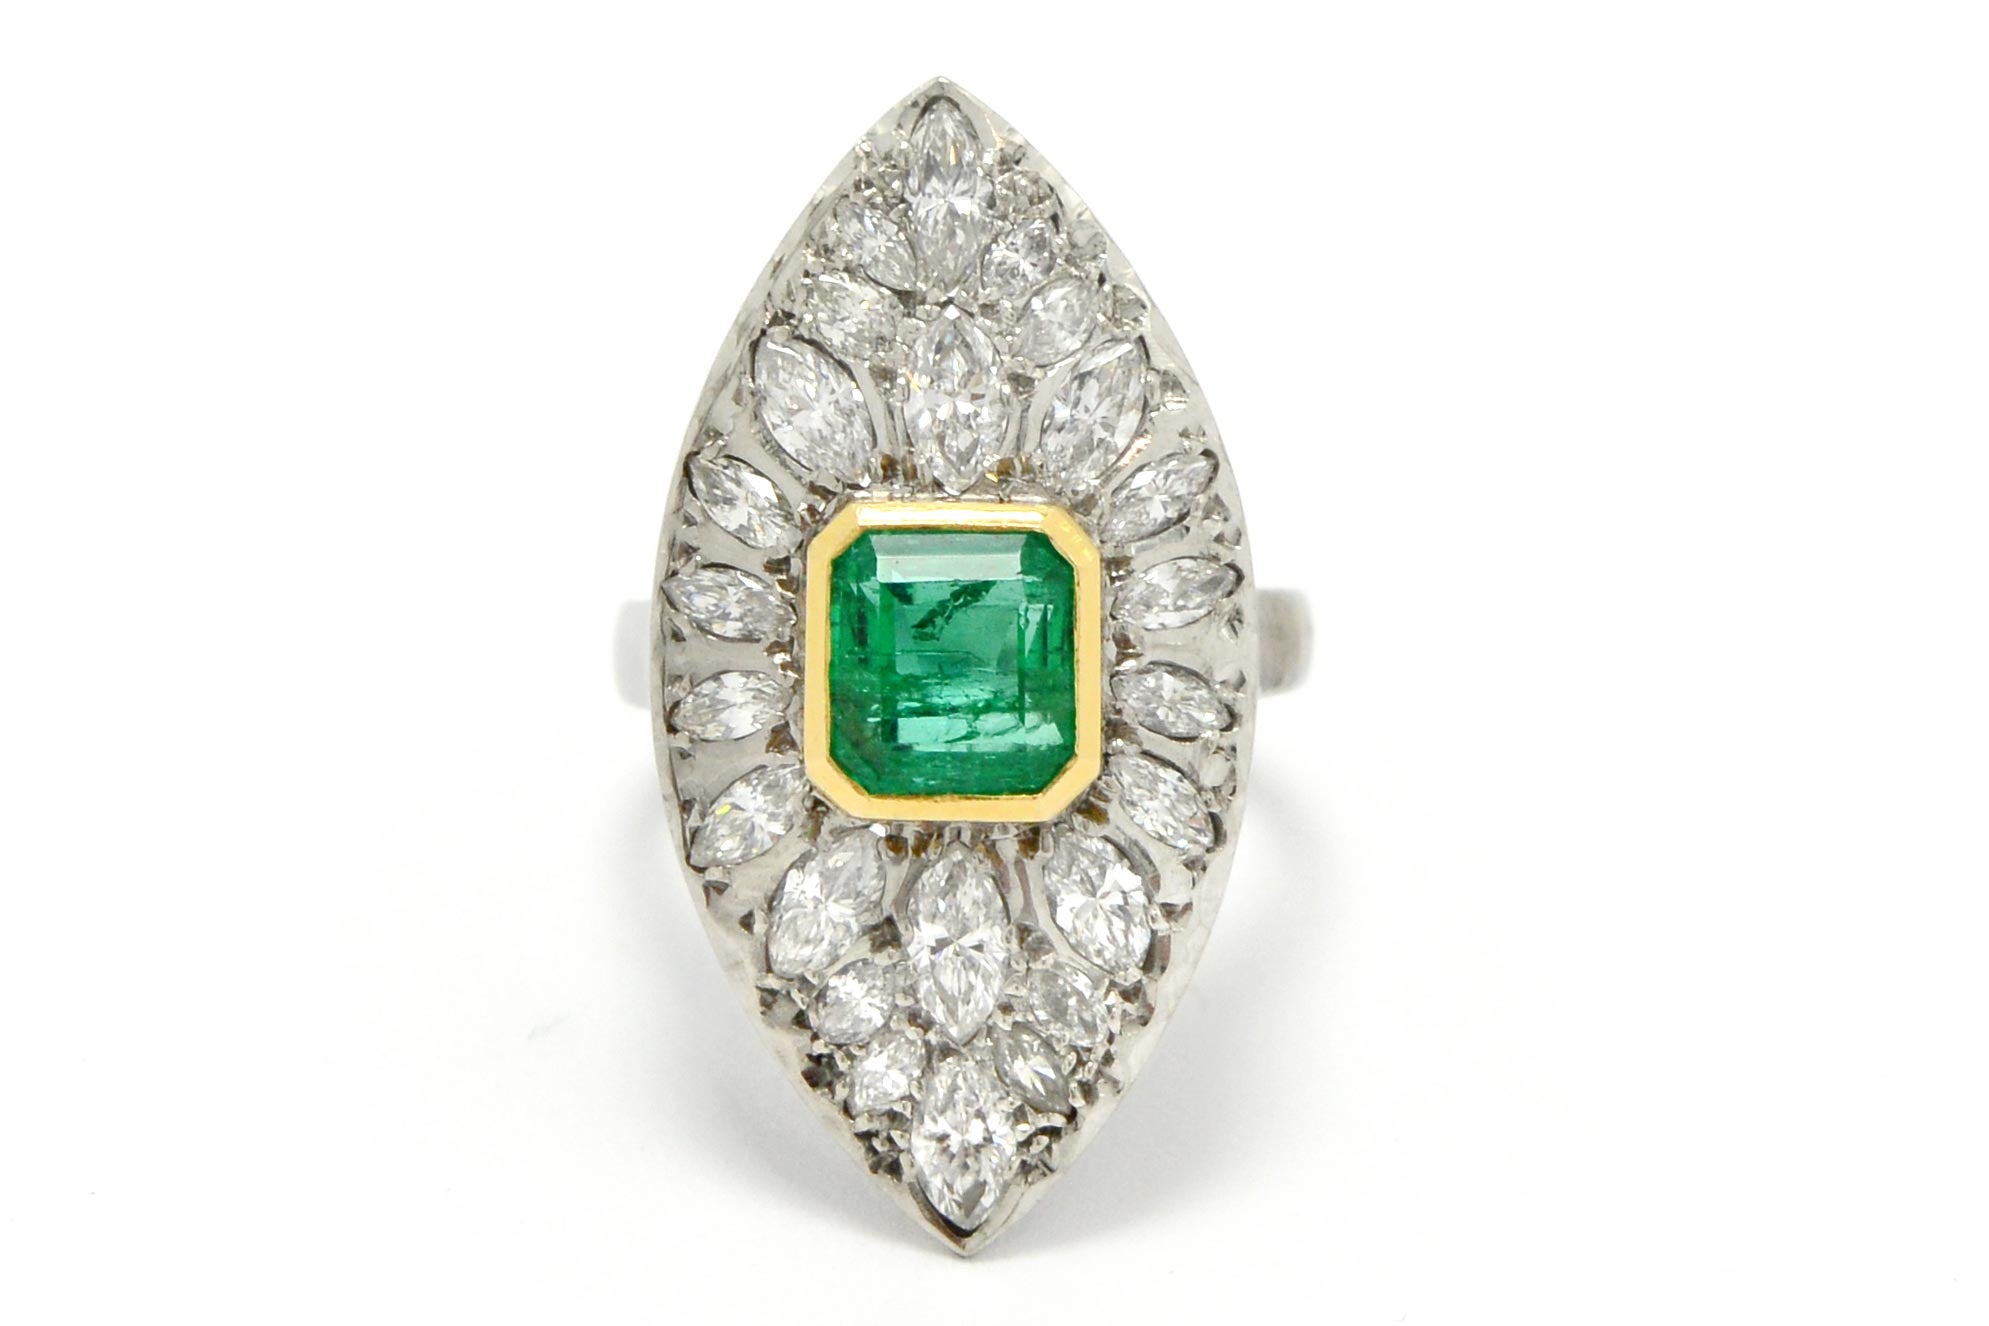 A stunning retro era estate cluster ring featuring a 2 carat Colombian emerald.